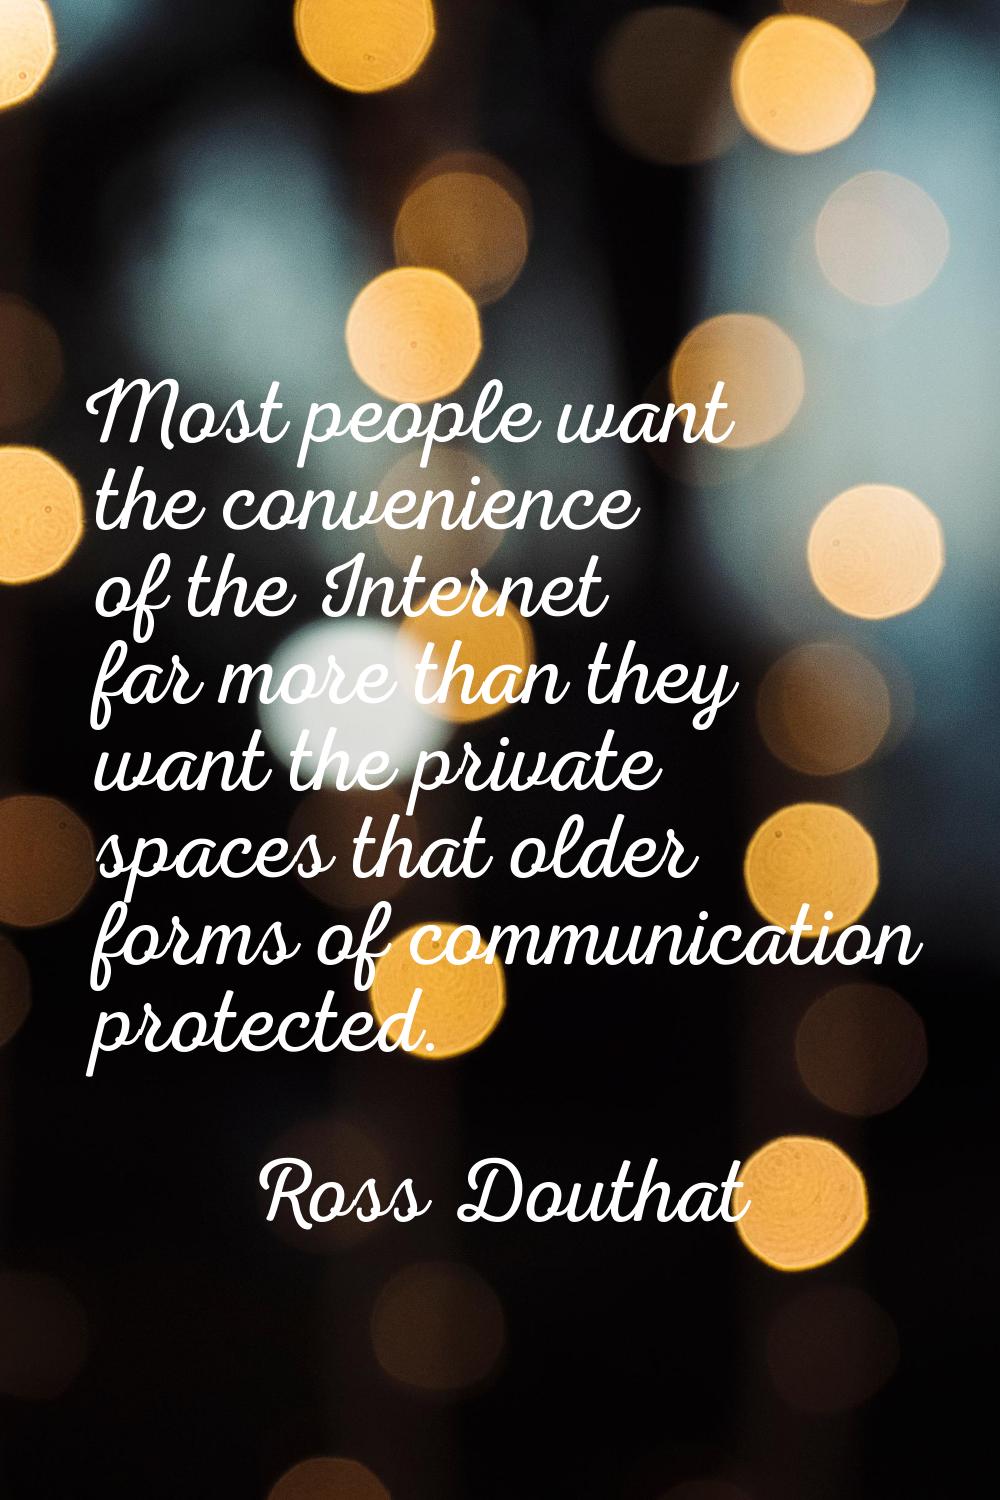 Most people want the convenience of the Internet far more than they want the private spaces that ol